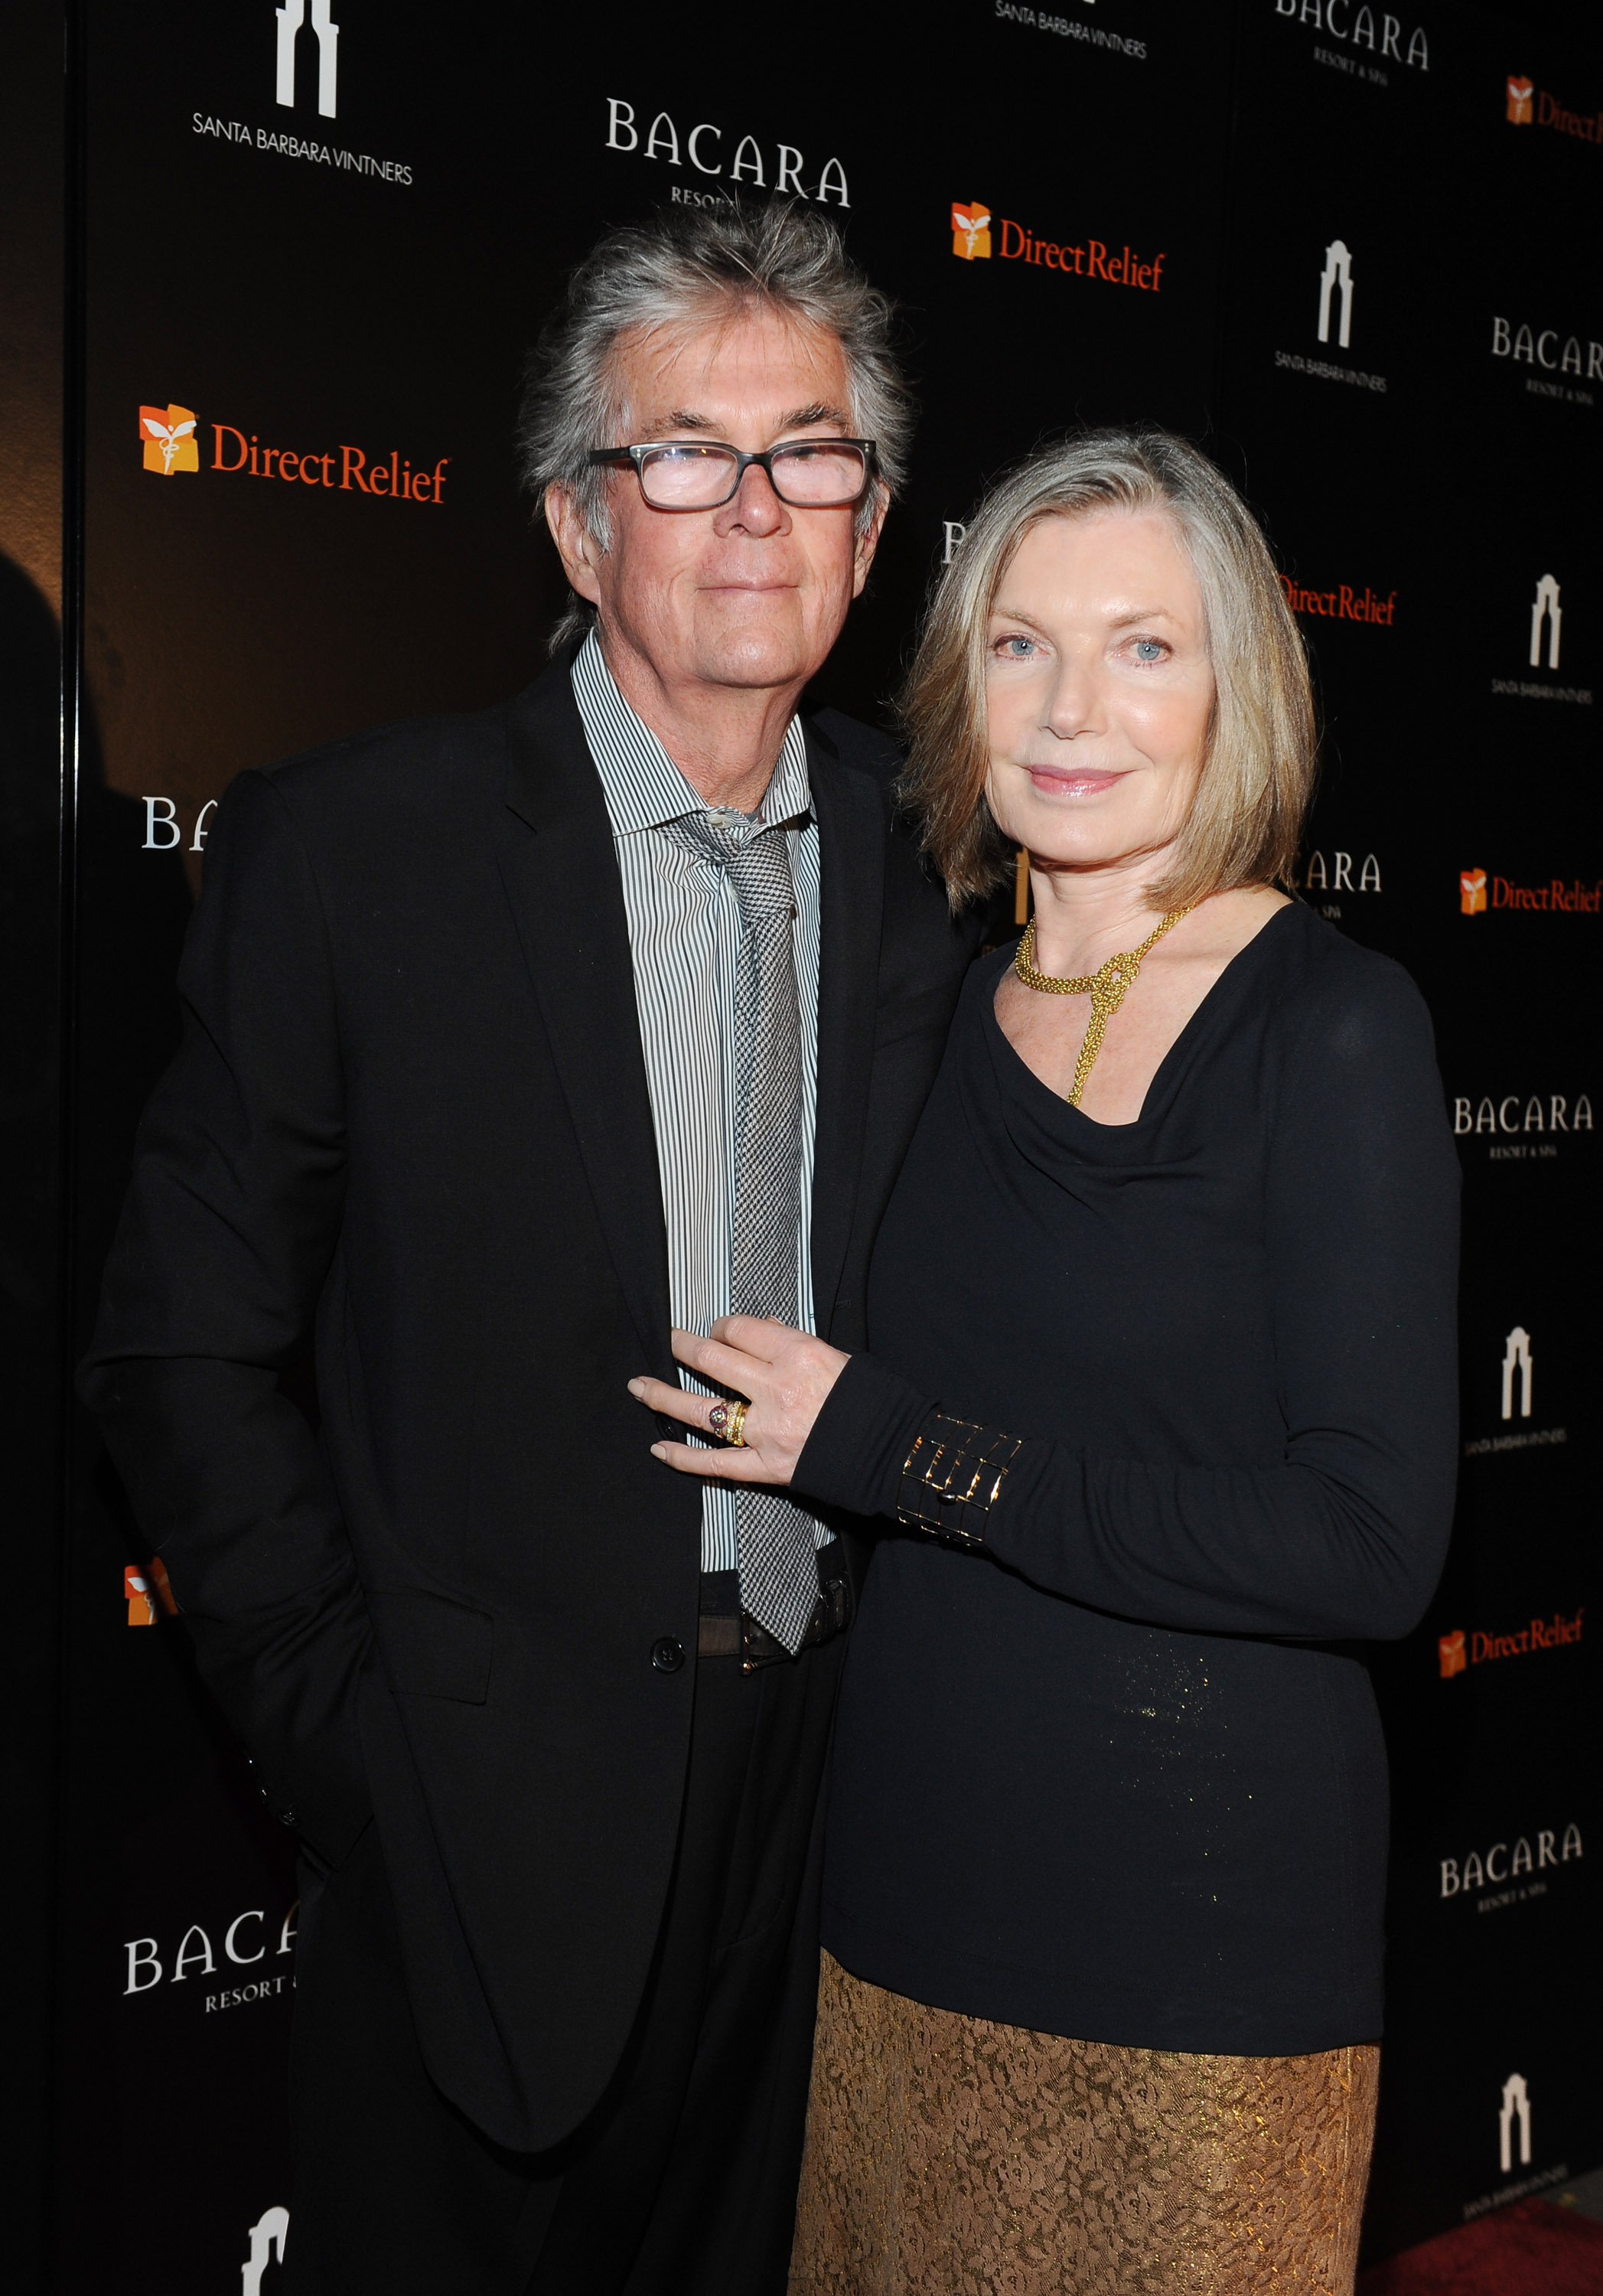 Connell Cowan and Susan Sullivan on February 22, 2014 in Santa Barbara, California | Source: Getty Images